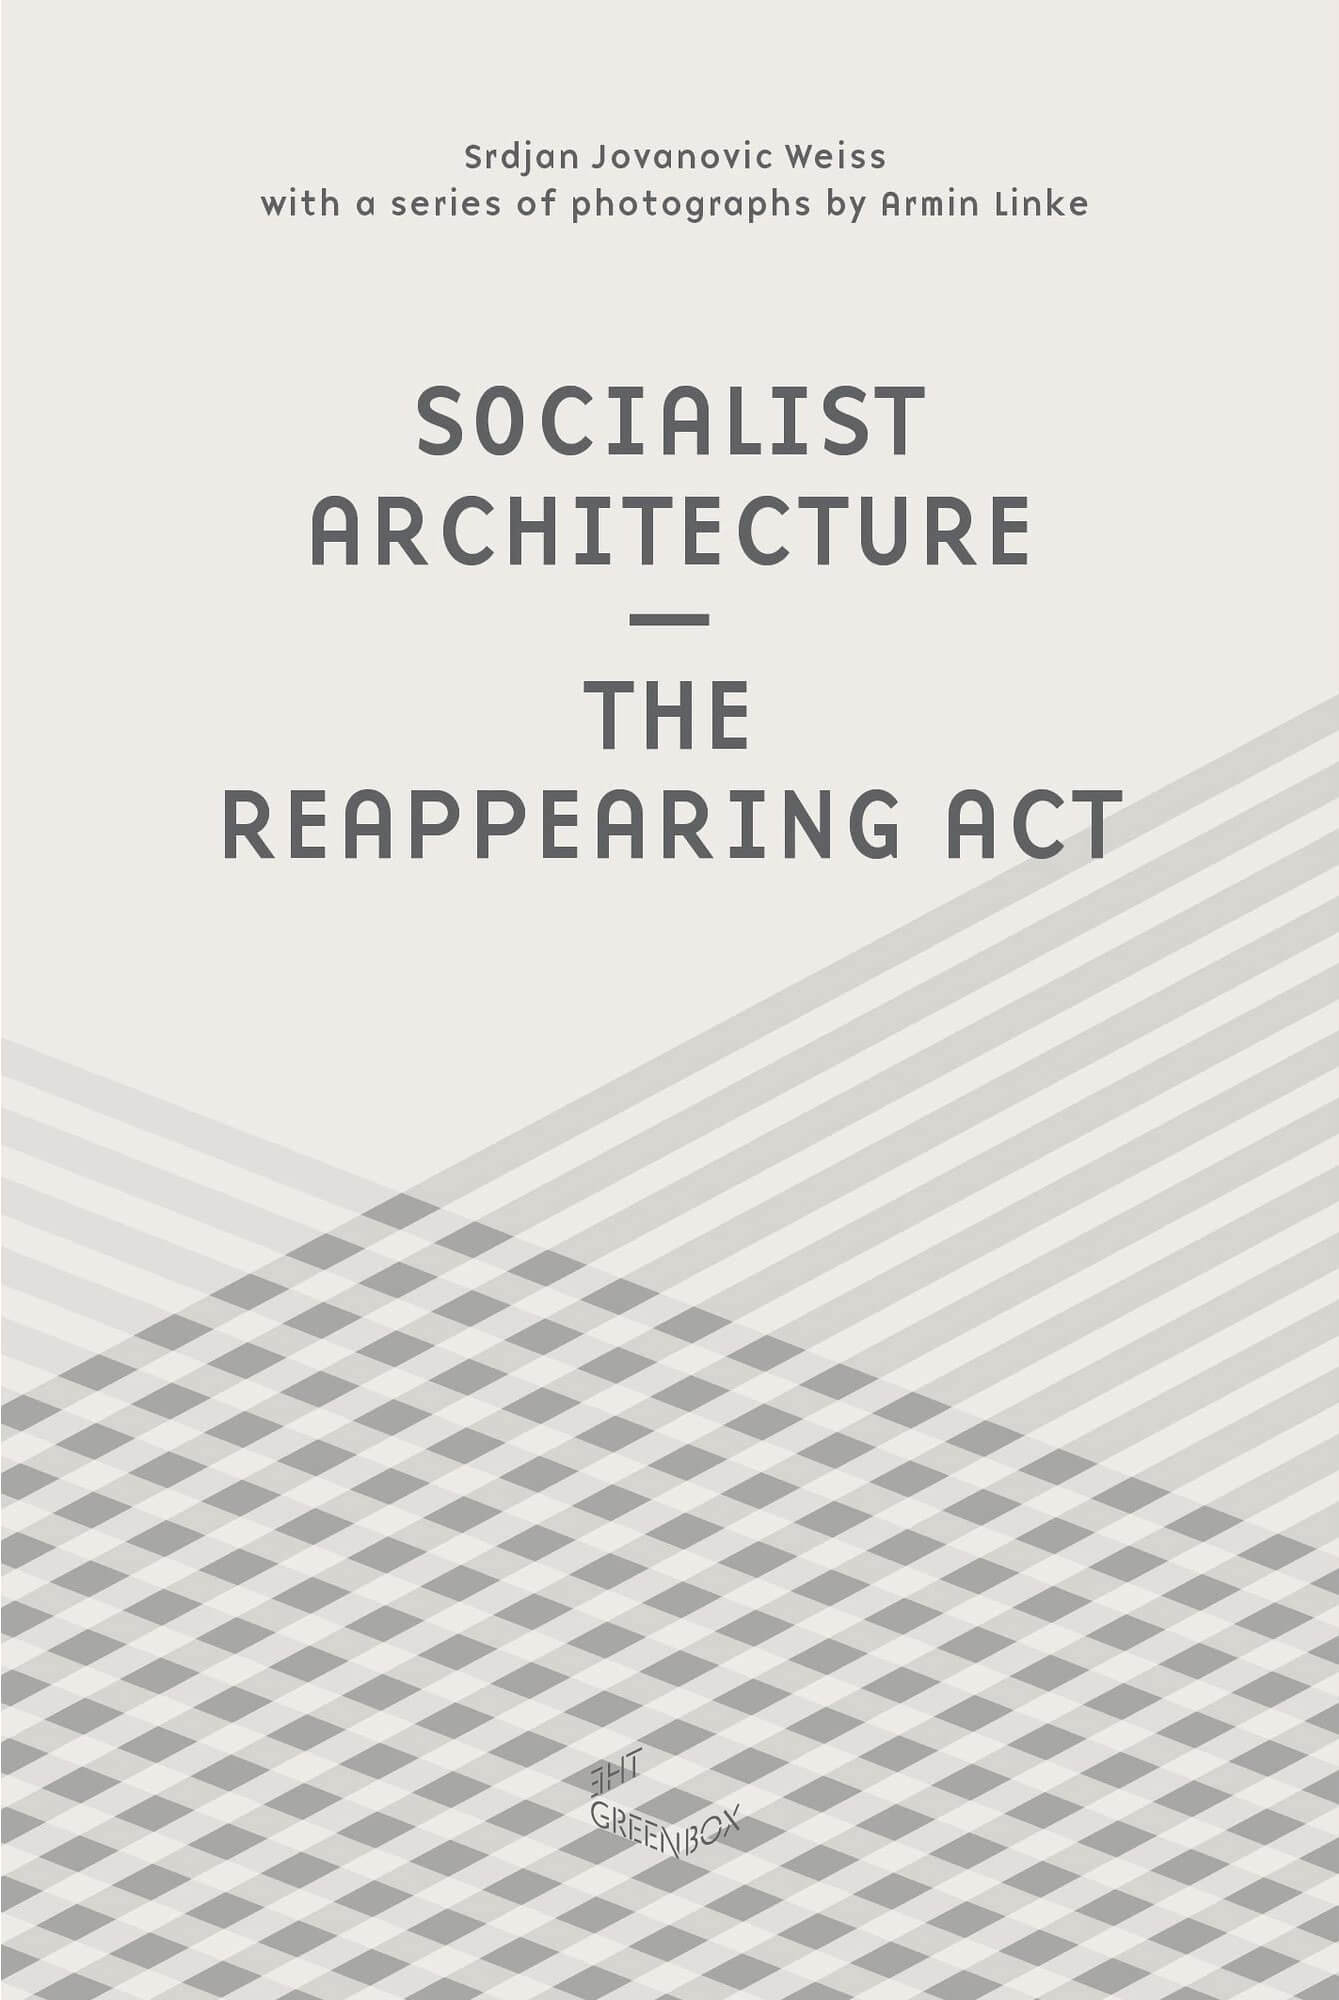 the cover of a book on socialist architecture, grey with grey stripes